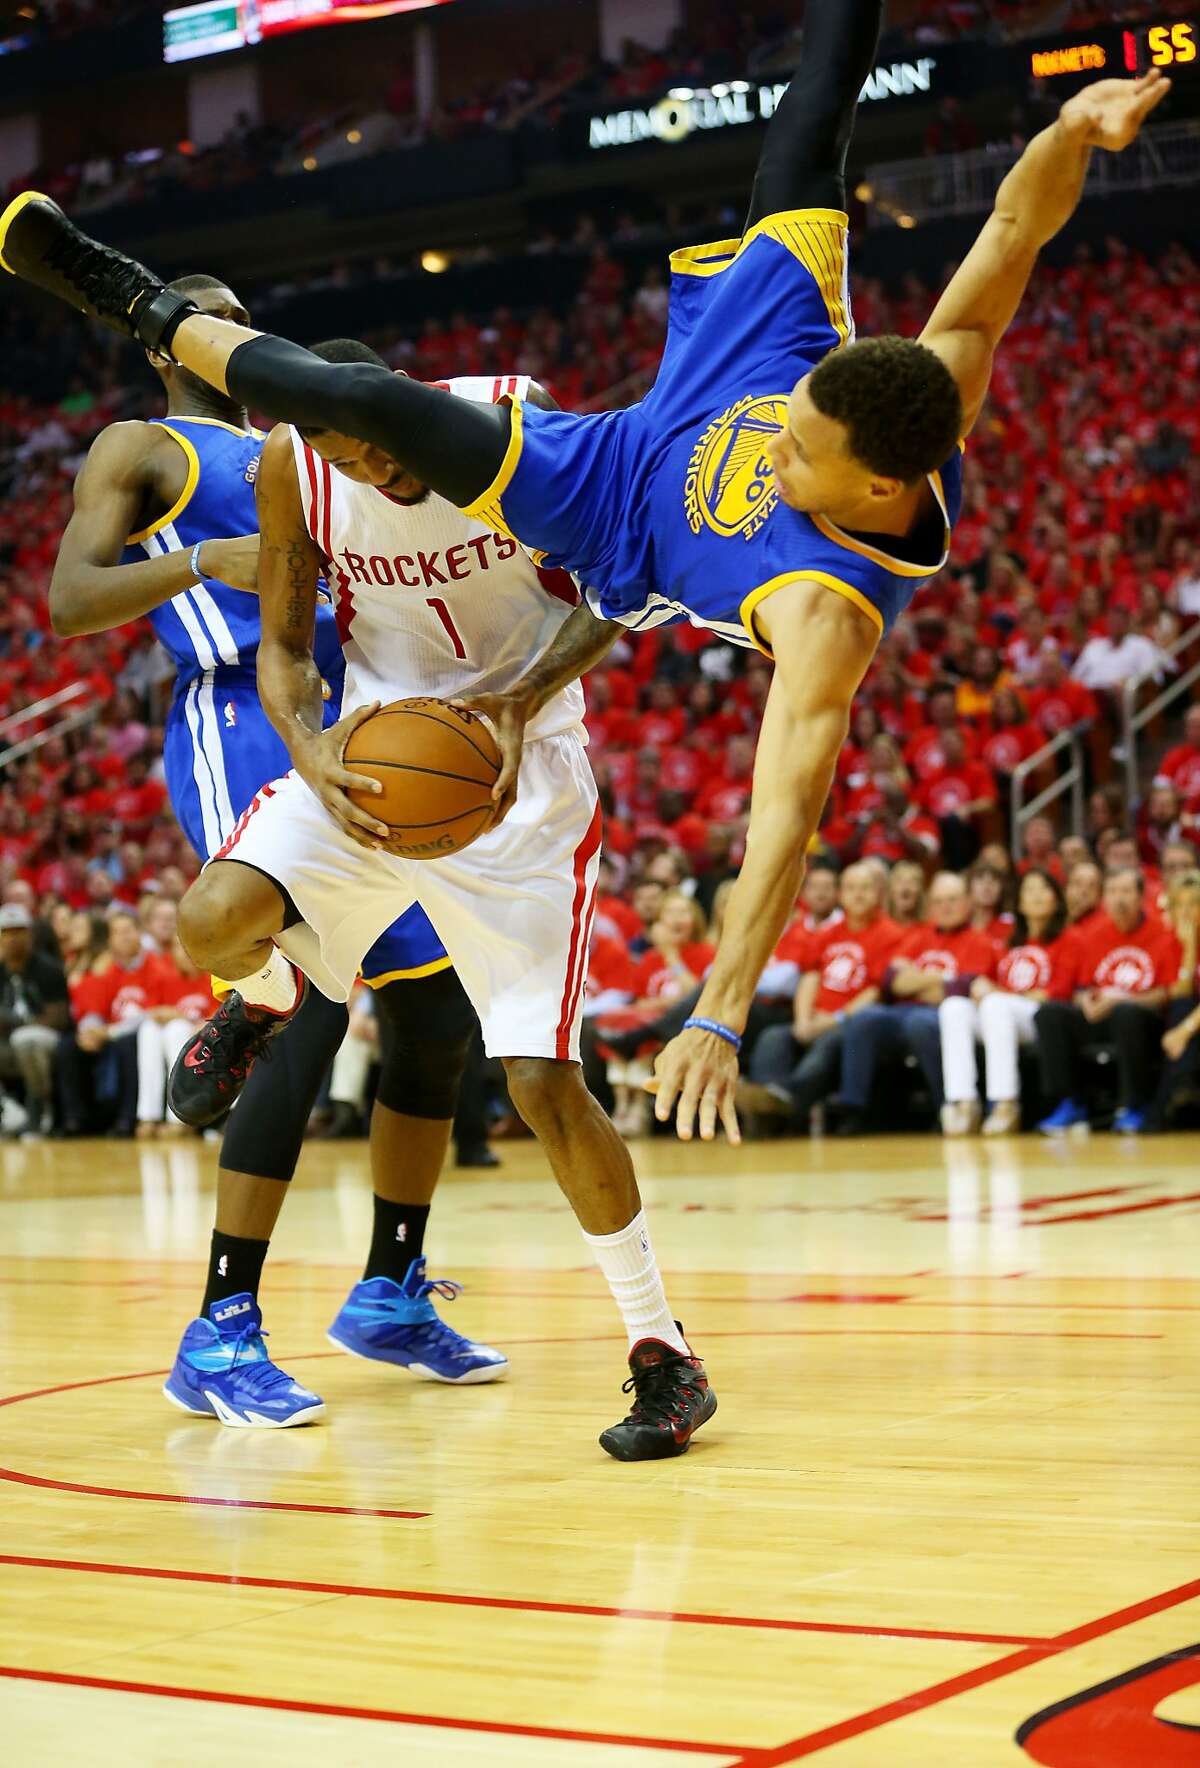 HOUSTON, TX - MAY 25: Stephen Curry #30 of the Golden State Warriors falls over Trevor Ariza #1 of the Houston Rockets on his way to an injury in the second quarter during Game Four of the Western Conference Finals of the 2015 NBA Playoffs at Toyota Center on May 25, 2015 in Houston, Texas. NOTE TO USER: User expressly acknowledges and agrees that, by downloading and or using this photograph, user is consenting to the terms and conditions of Getty Images License Agreement. (Photo by Ronald Martinez/Getty Images)